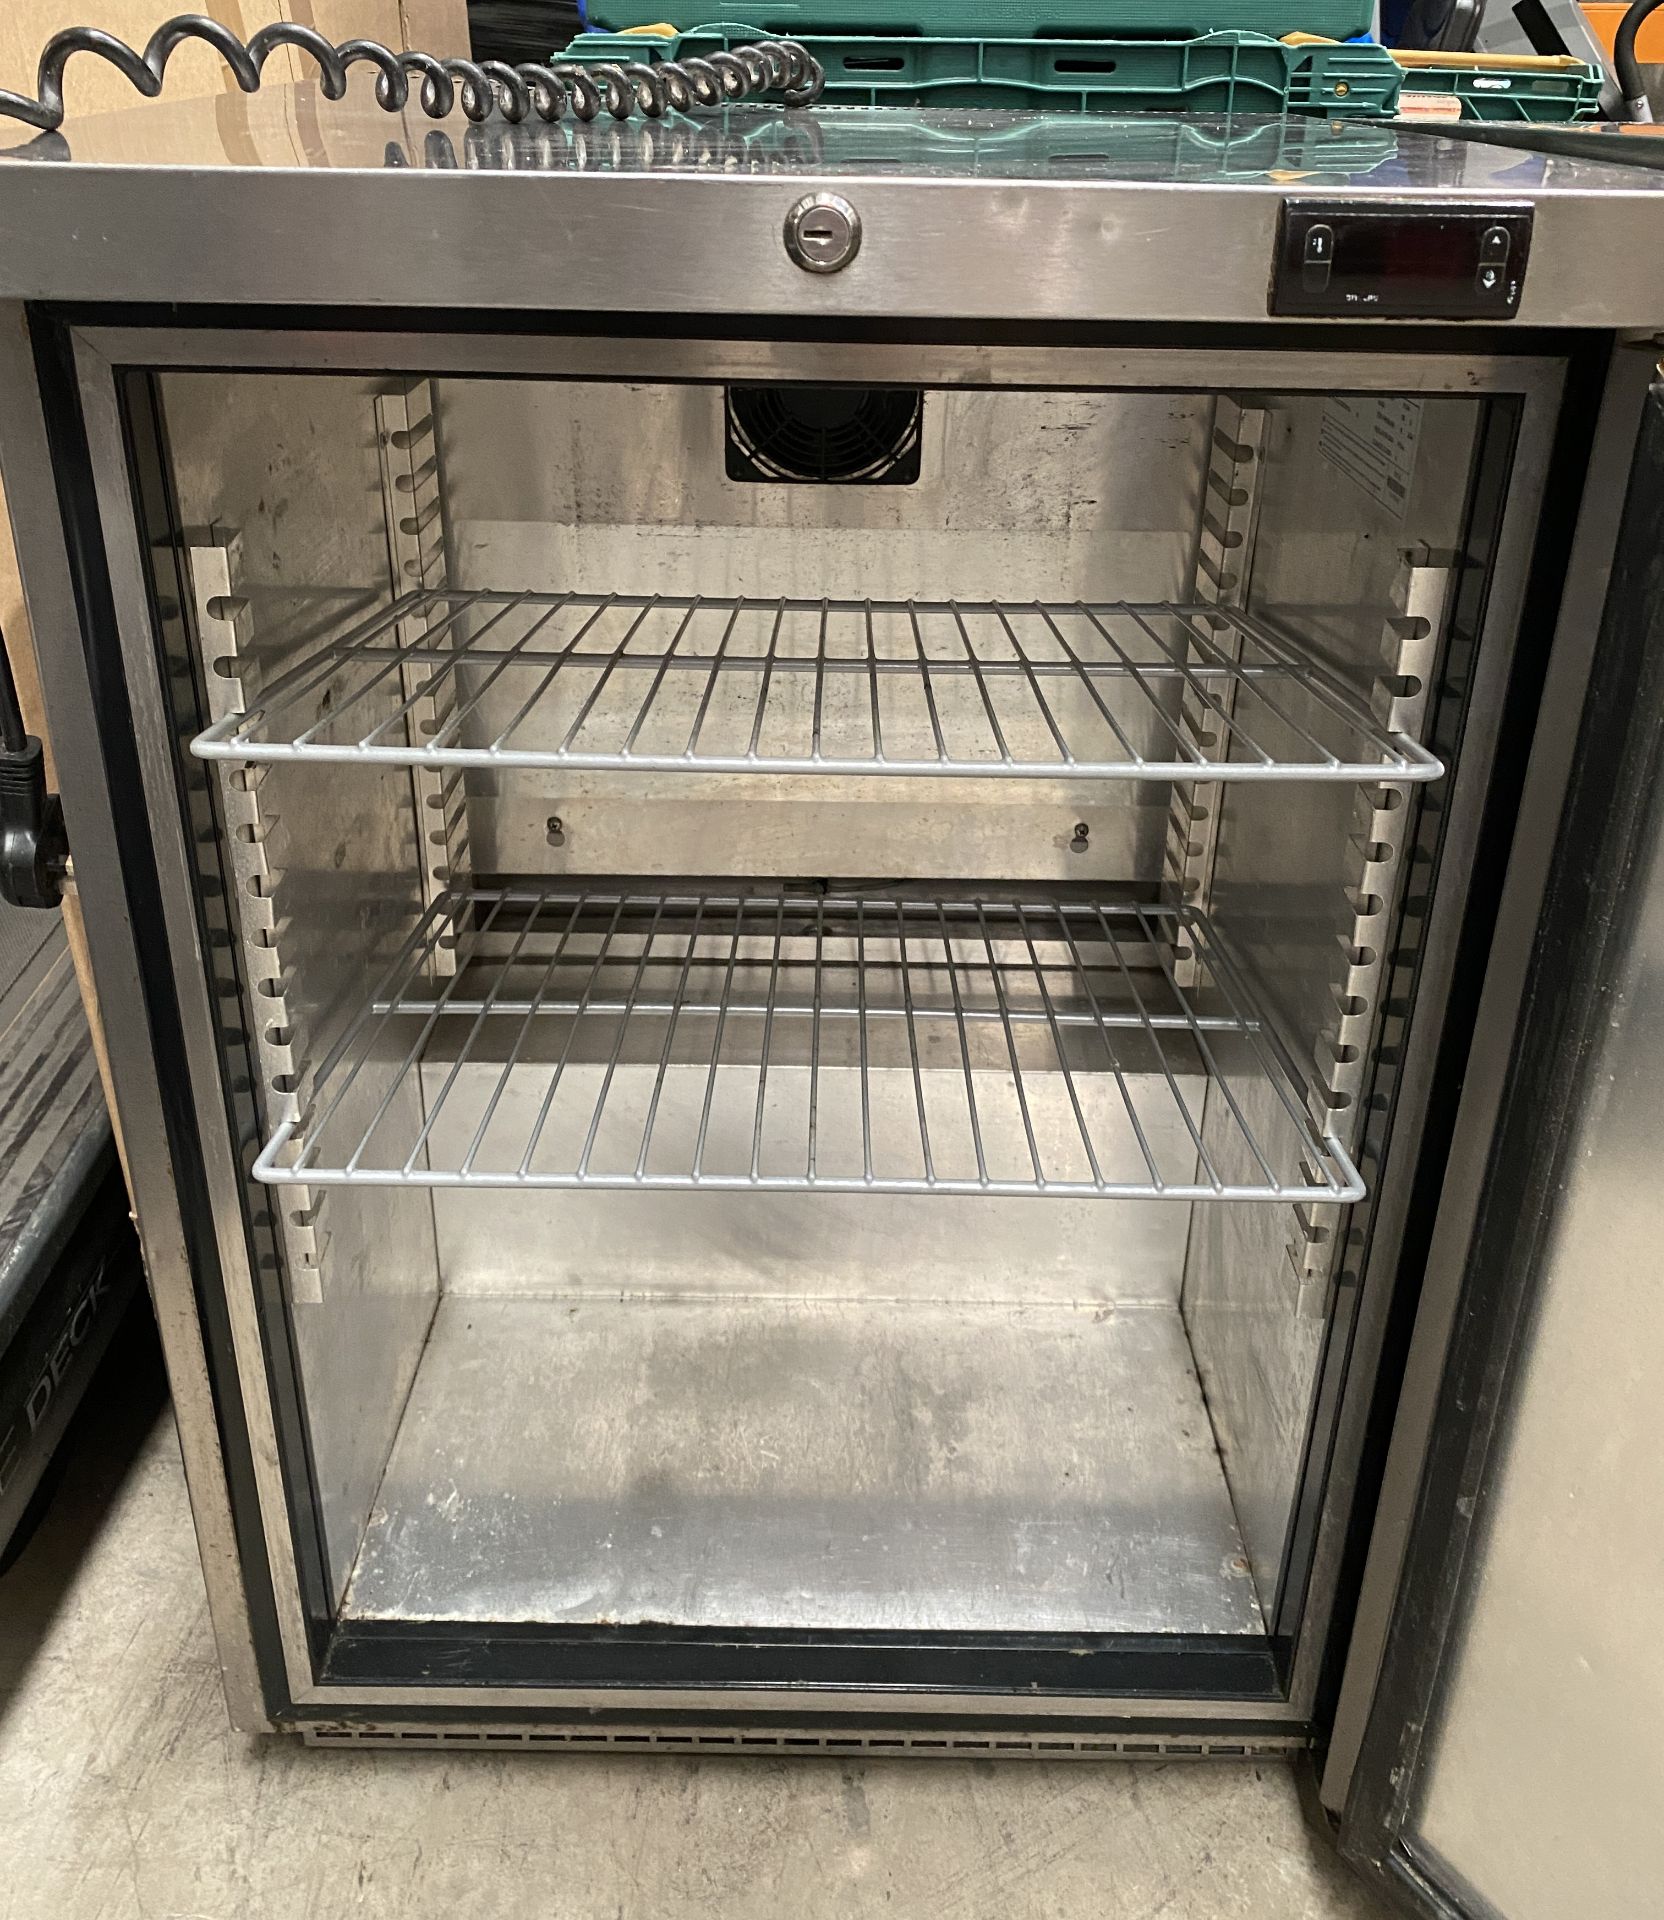 Foster Stainless Steel Undercounter Fridge with 2 Shelves - Image 2 of 2